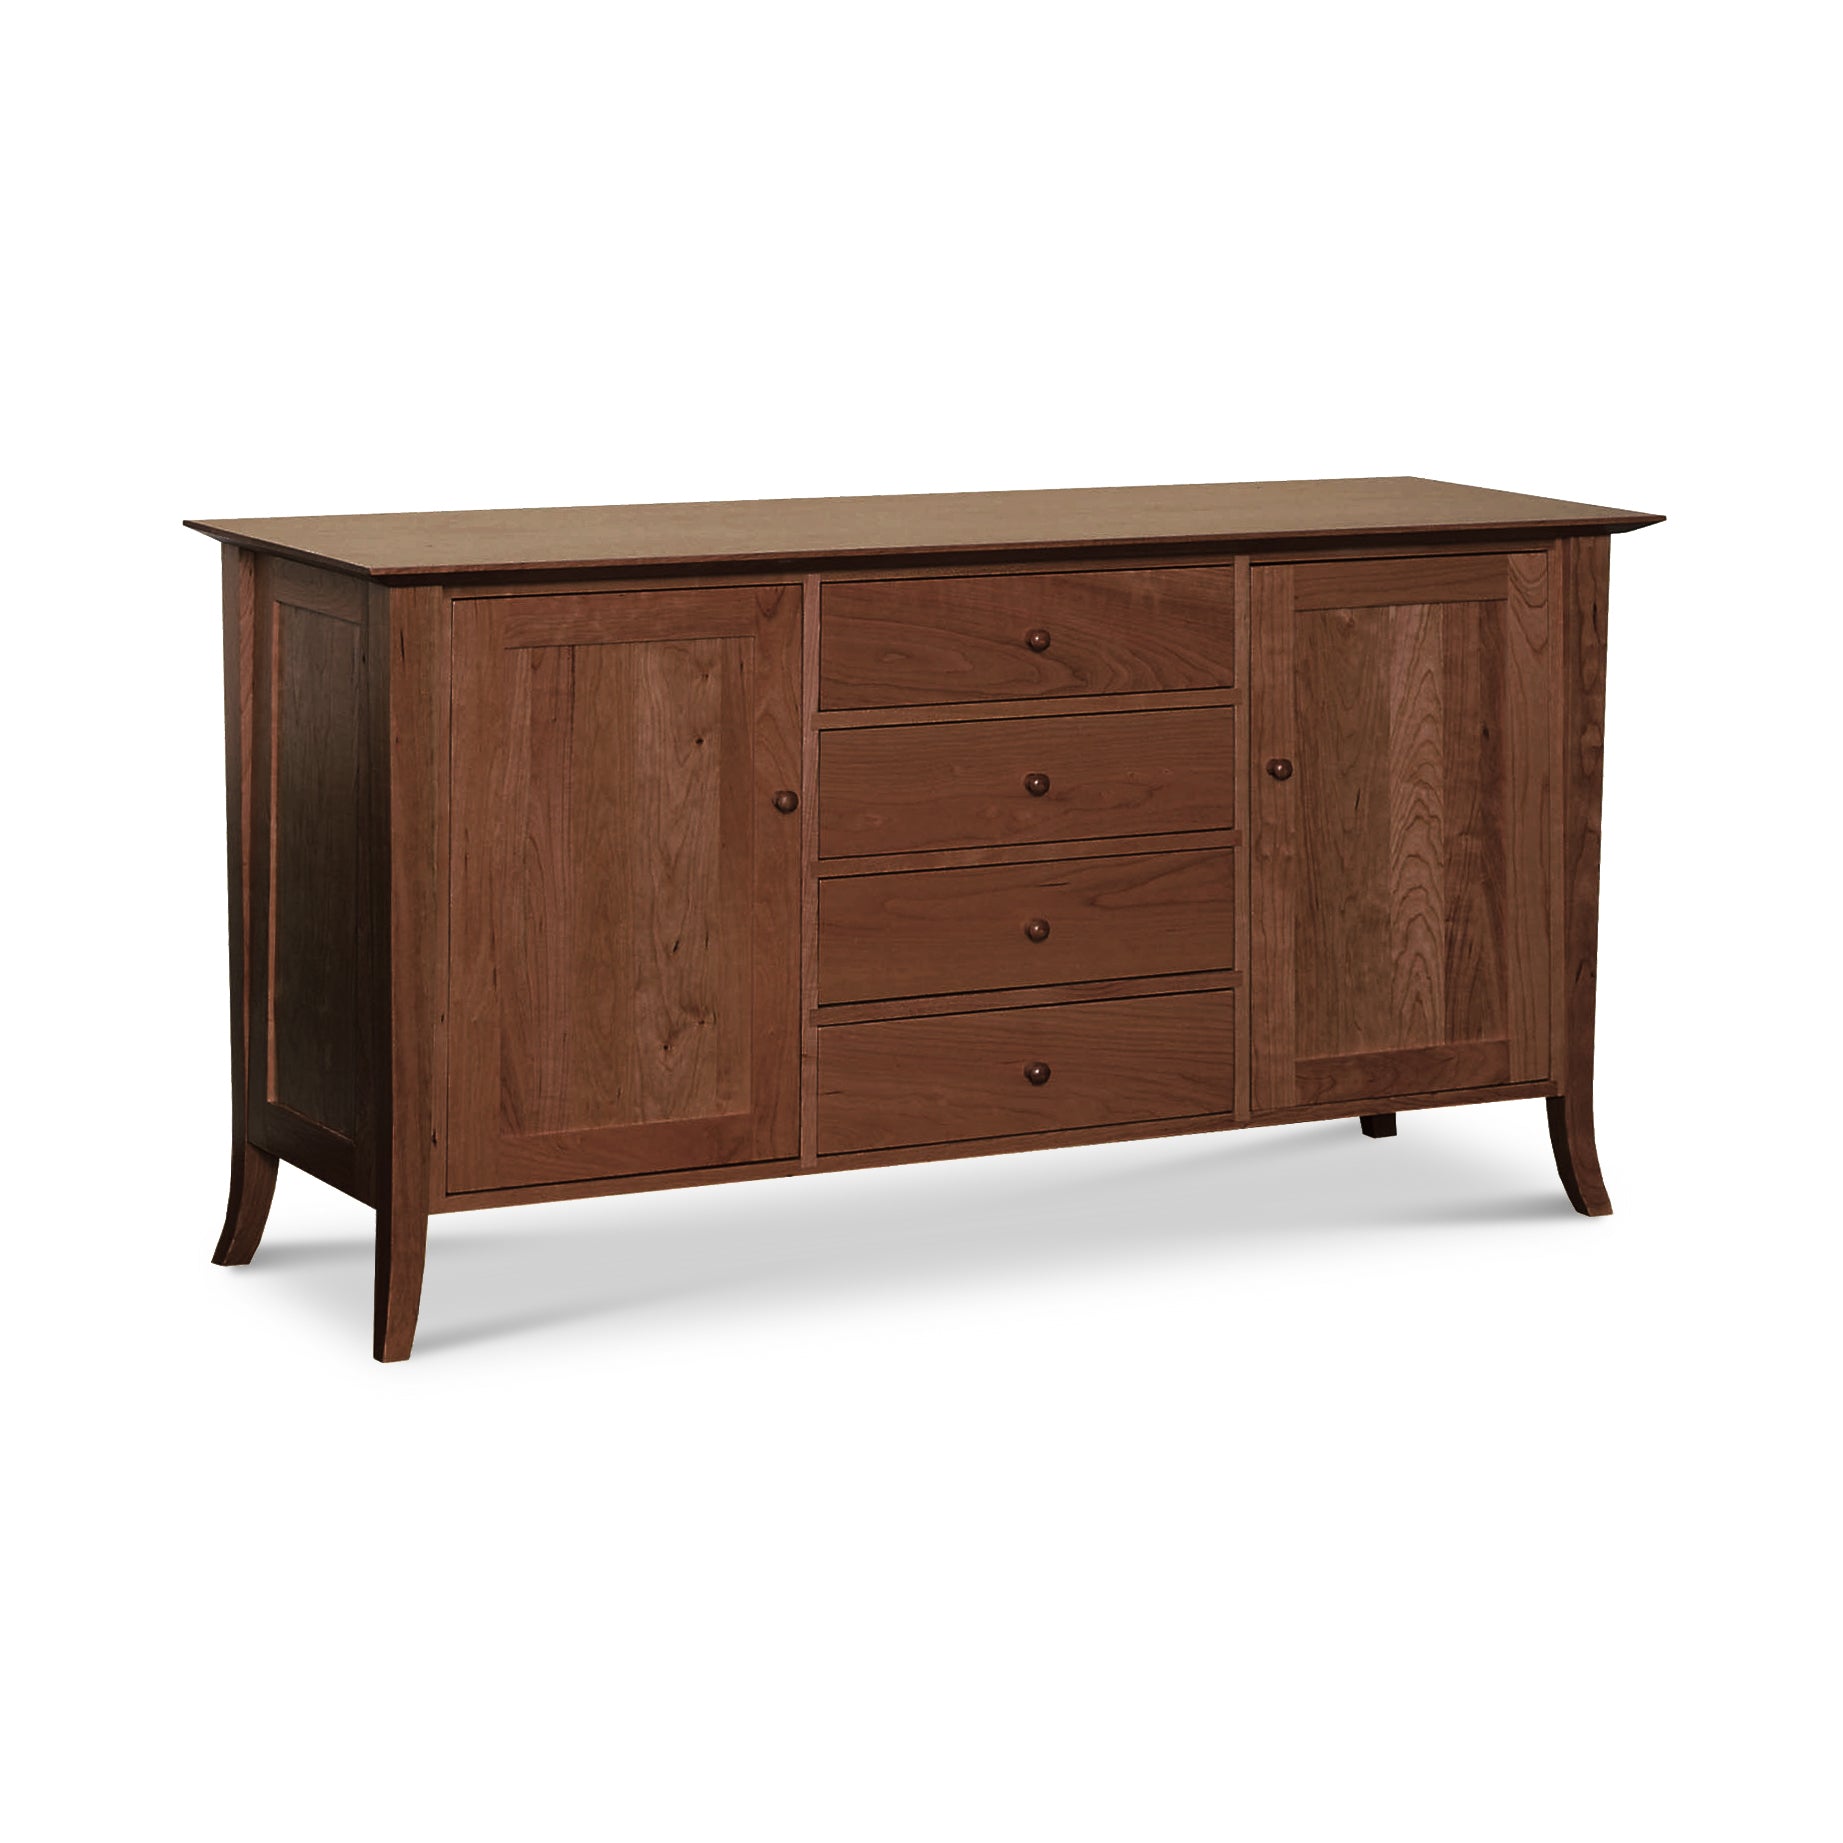 A natural cherry wooden Classic Shaker Flare Leg Large Buffet with drawers and doors, showcasing Lyndon Furniture craftsmanship.